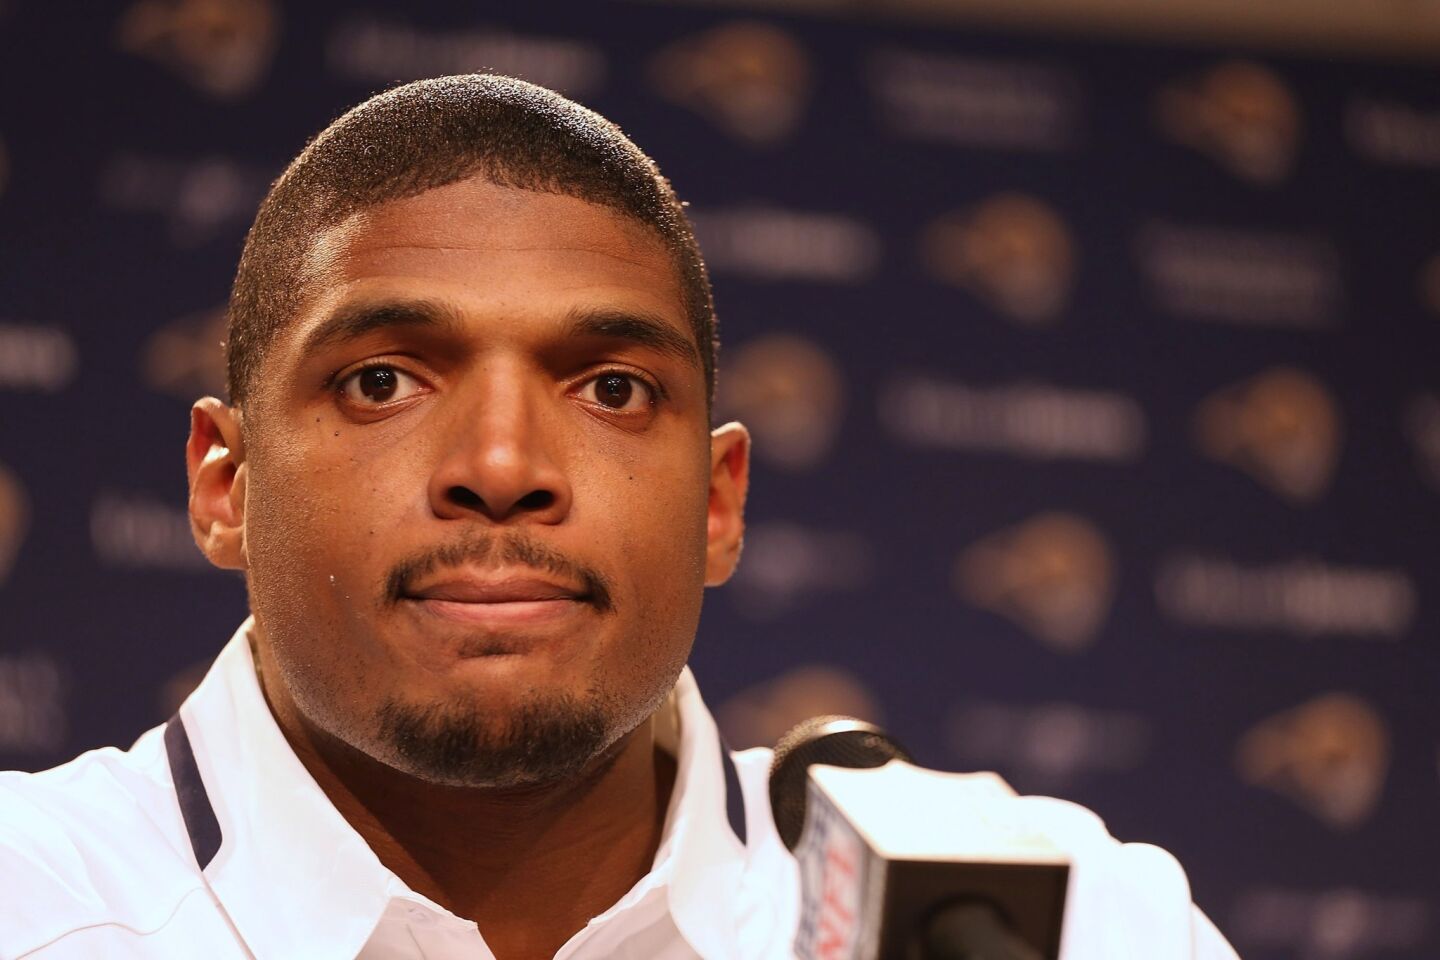 Michael Sam addresses reporters during a news conference after being selected by the St. Louis Rams in the seventh round of 2014 NFL draft in May.